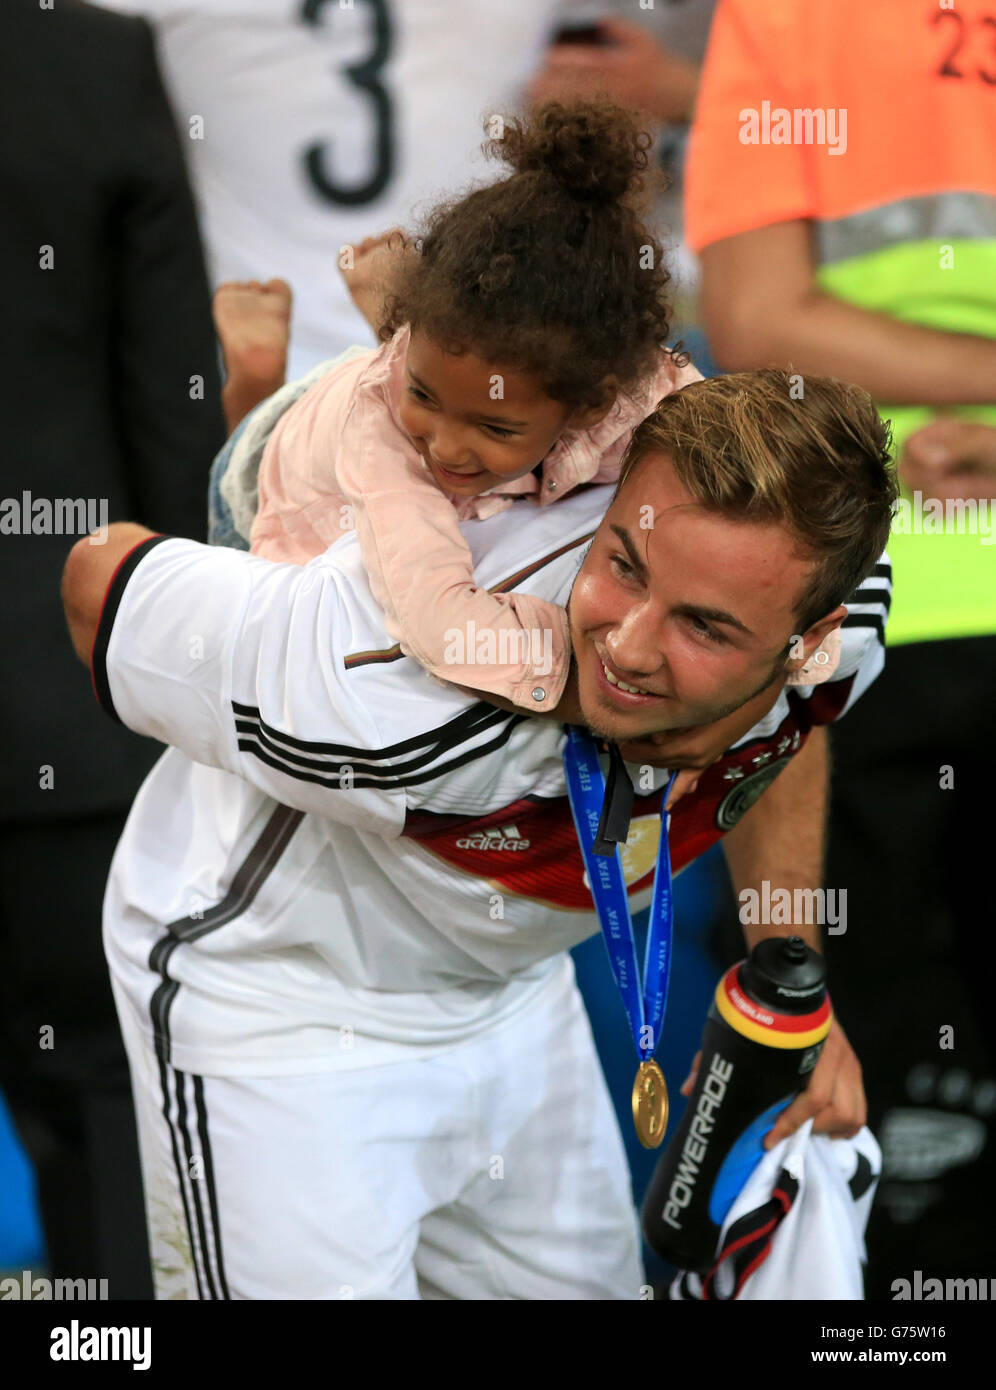 Soccer - FIFA World Cup 2014 - Final - Germany v Argentina - Estadio do Maracana. Germany's Mario Gotze celebrates on the pitch after lifting the FIFA World Cup 2014 Trophy Stock Photo